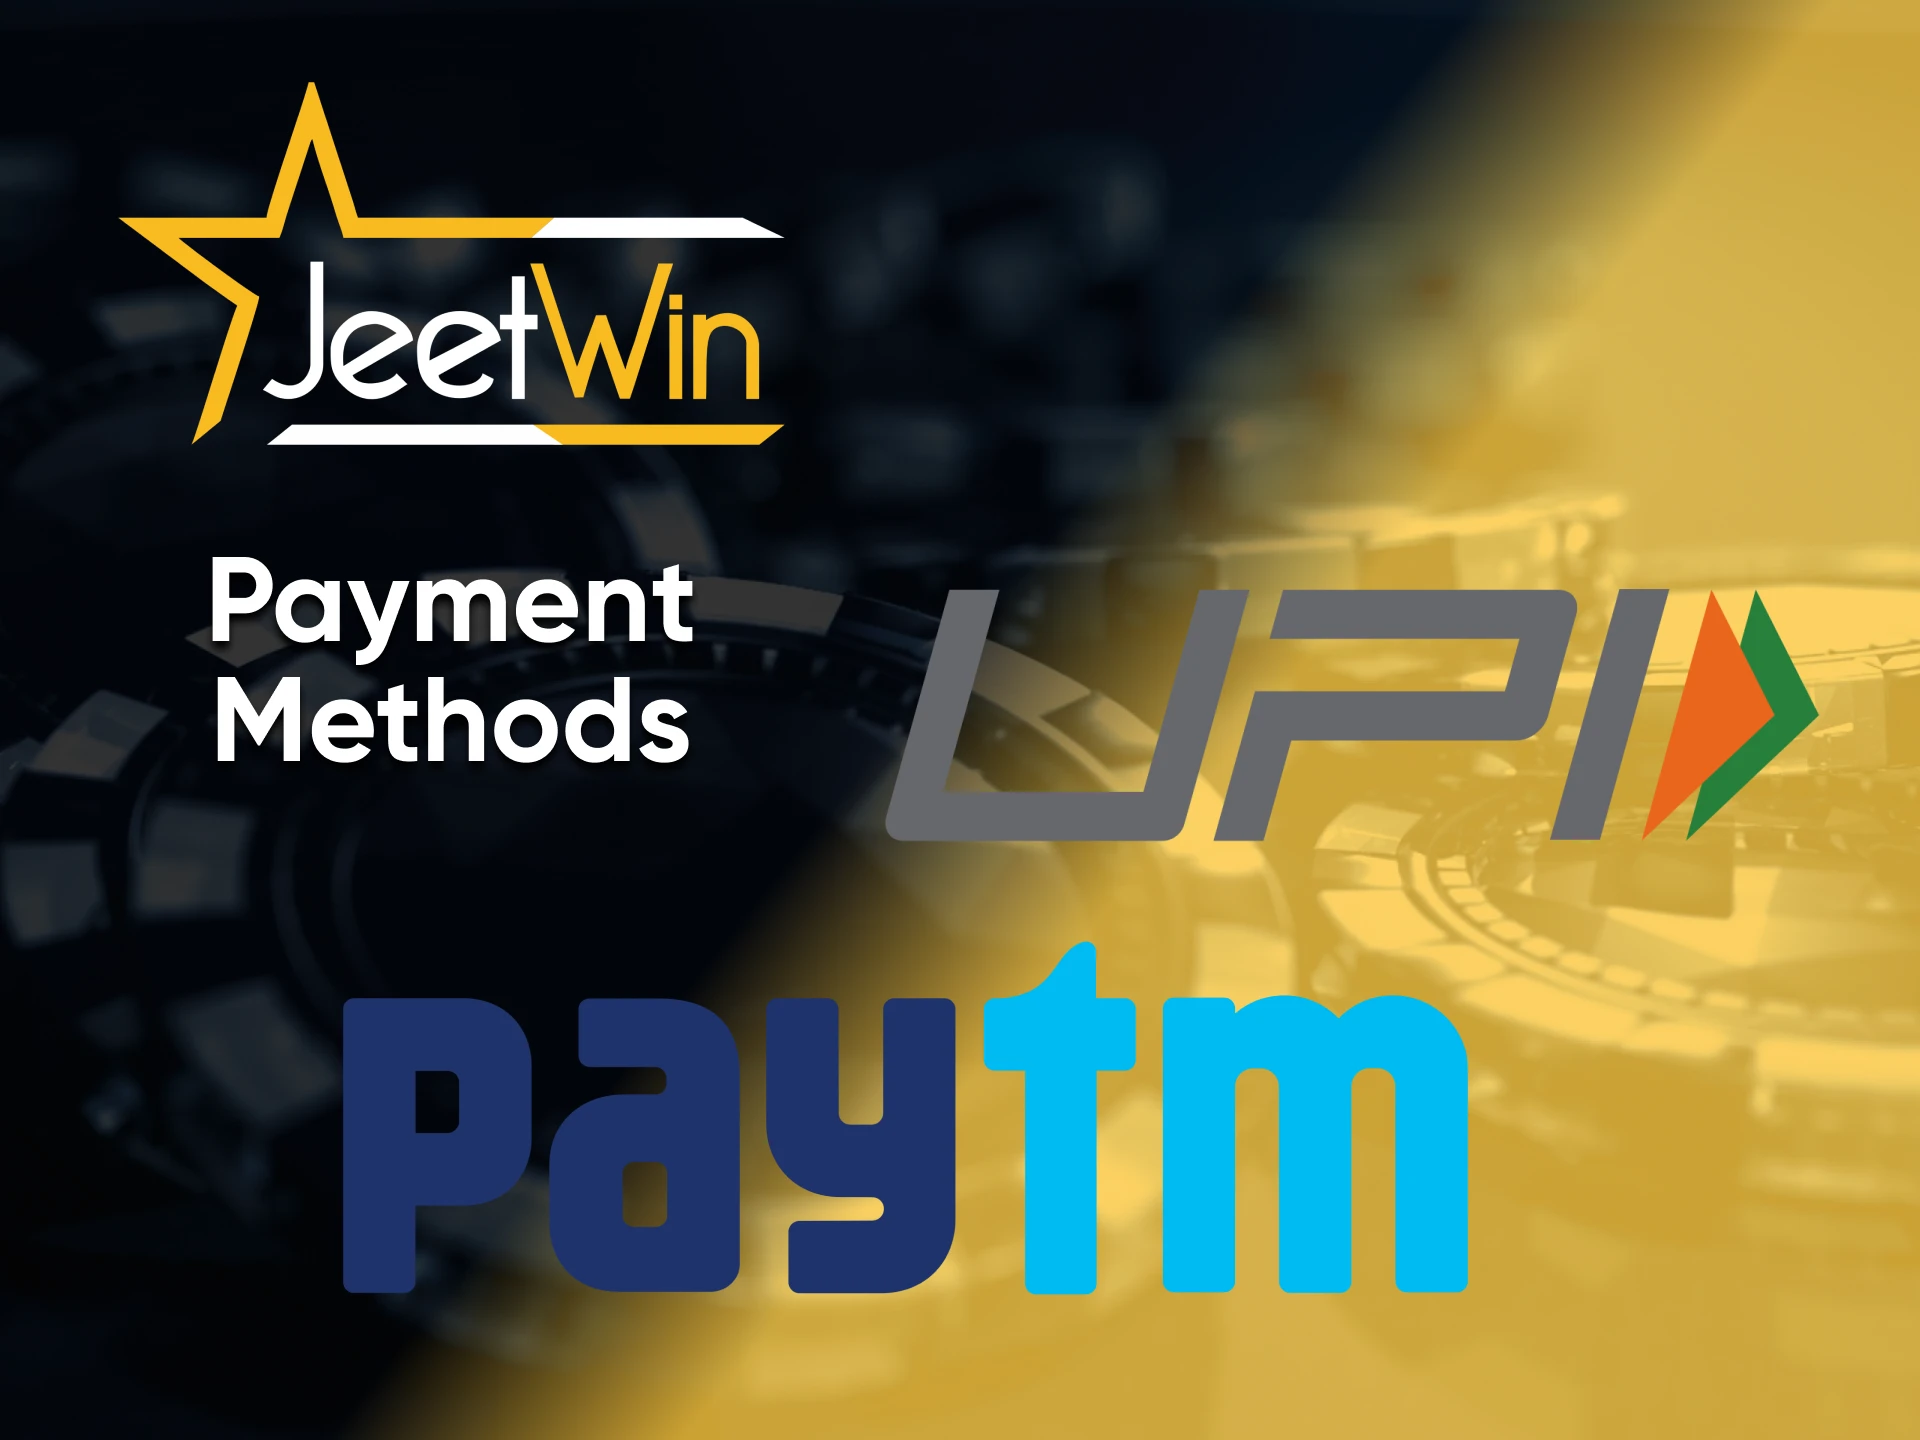 On the Jeetwin platform, there are many ways to fund your account.